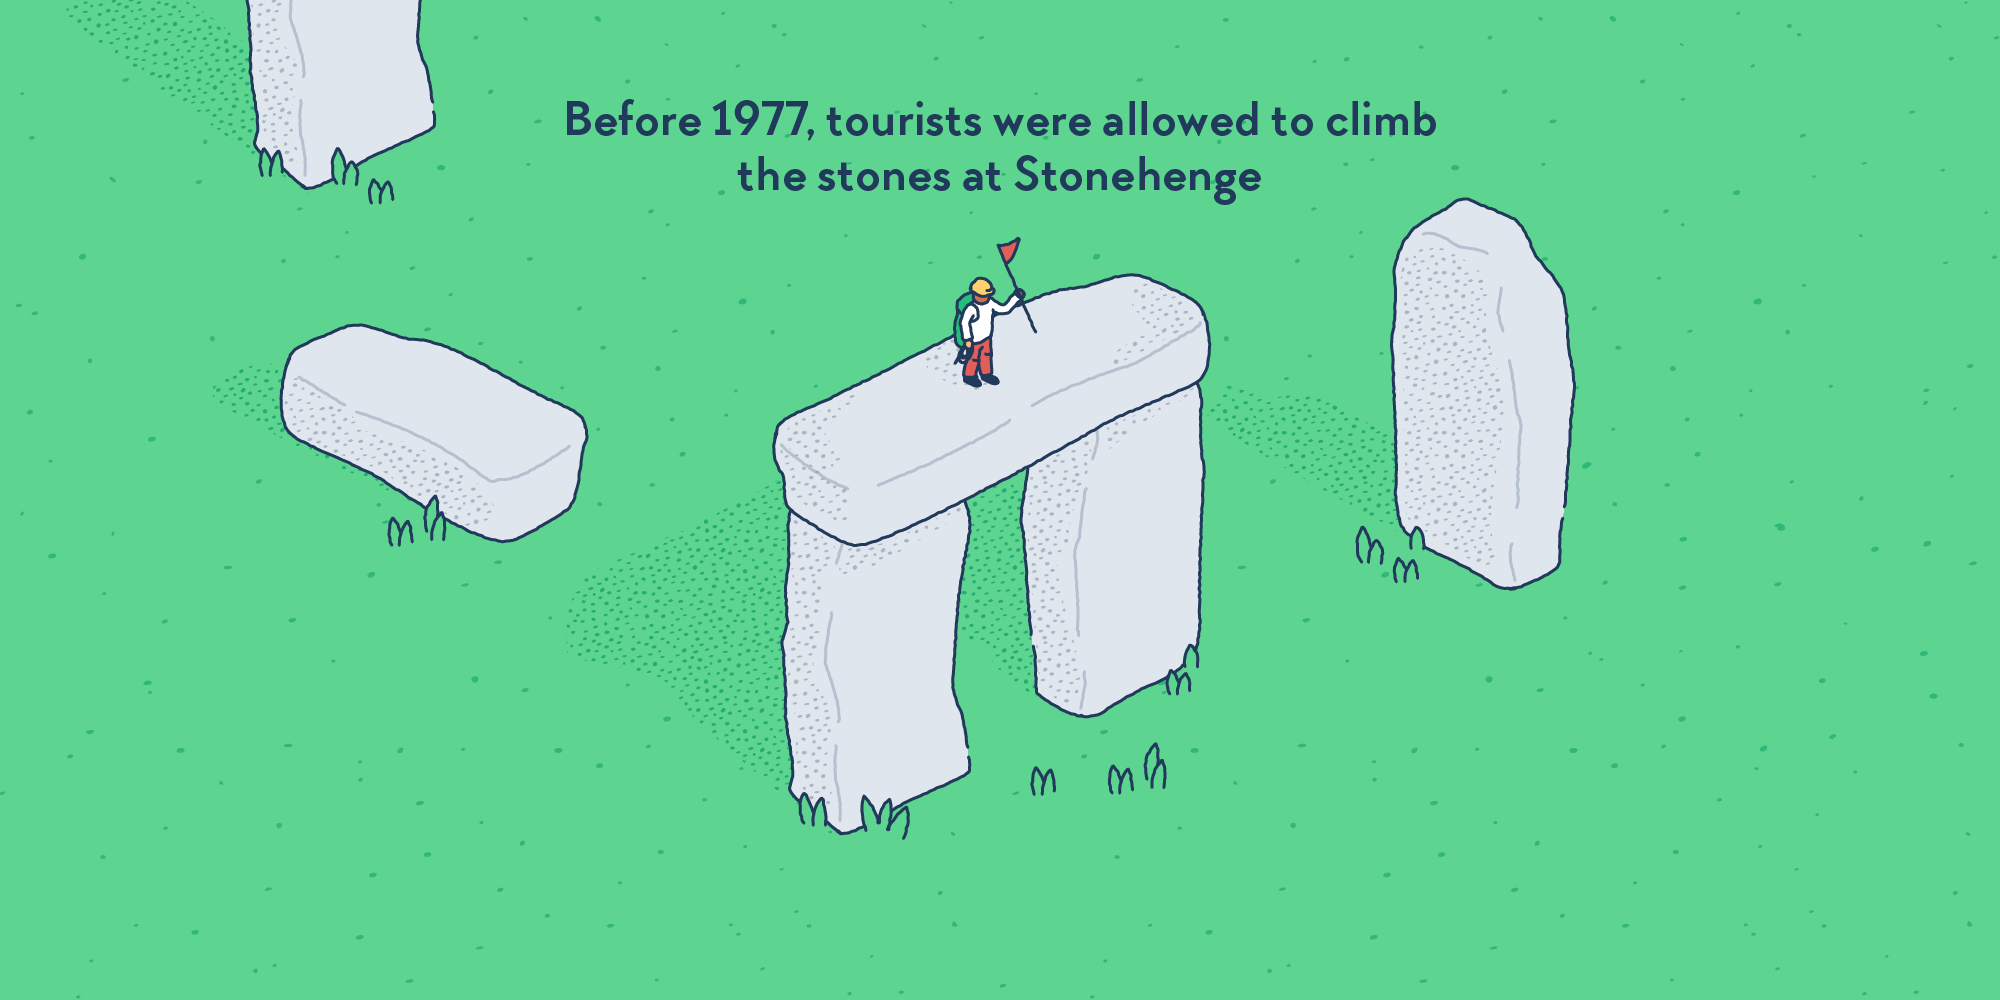 On the very top of one of the big rocks of the prehistoric monument of Stonehenge, stands a little character in full mountain climbing equipment